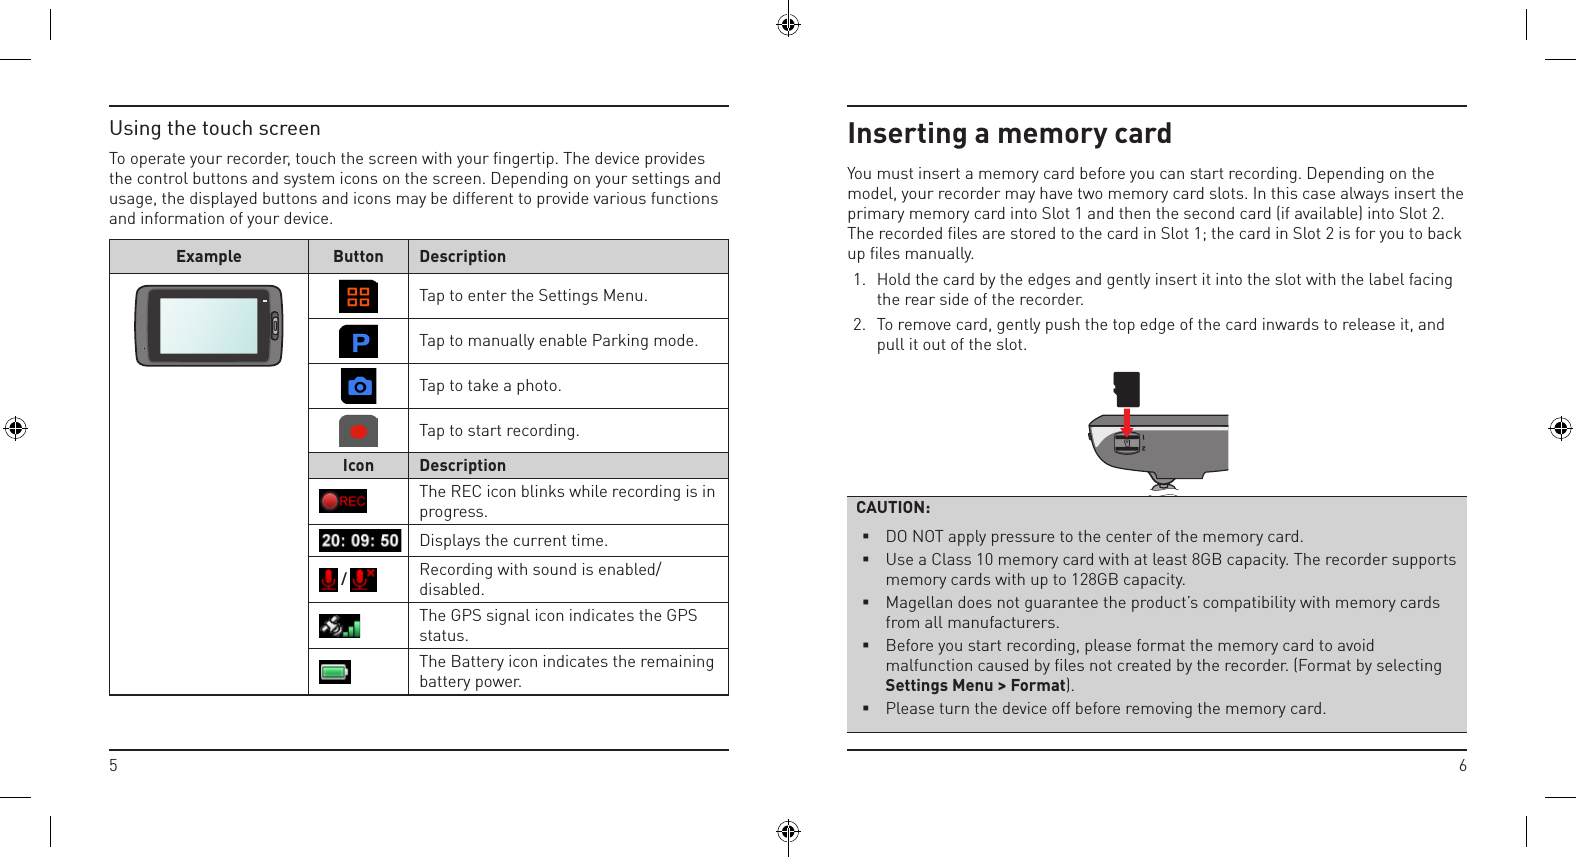 65Inserting a memory cardYou must insert a memory card before you can start recording. Depending on the model, your recorder may have two memory card slots. In this case always insert the primary memory card into Slot 1 and then the second card (if available) into Slot 2. The recorded ﬁles are stored to the card in Slot 1; the card in Slot 2 is for you to back up ﬁles manually.1.  Hold the card by the edges and gently insert it into the slot with the label facing the rear side of the recorder.2.  To remove card, gently push the top edge of the card inwards to release it, and pull it out of the slot.CAUTION: DO NOT apply pressure to the center of the memory card. Use a Class 10 memory card with at least 8GB capacity. The recorder supports memory cards with up to 128GB capacity. Magellan does not guarantee the product’s compatibility with memory cards from all manufacturers. Before you start recording, please format the memory card to avoid malfunction caused by files not created by the recorder. (Format by selecting Settings Menu &gt; Format). Please turn the device off before removing the memory card.Using the touch screenTo operate your recorder, touch the screen with your ﬁngertip. The device provides the control buttons and system icons on the screen. Depending on your settings and usage, the displayed buttons and icons may be different to provide various functions and information of your device.Example Button Description Tap to enter the Settings Menu.Tap to manually enable Parking mode.Tap to take a photo.Tap to start recording.Icon DescriptionThe REC icon blinks while recording is in progress.Displays the current time. /  Recording with sound is enabled/disabled.The GPS signal icon indicates the GPS status.The Battery icon indicates the remaining battery power.